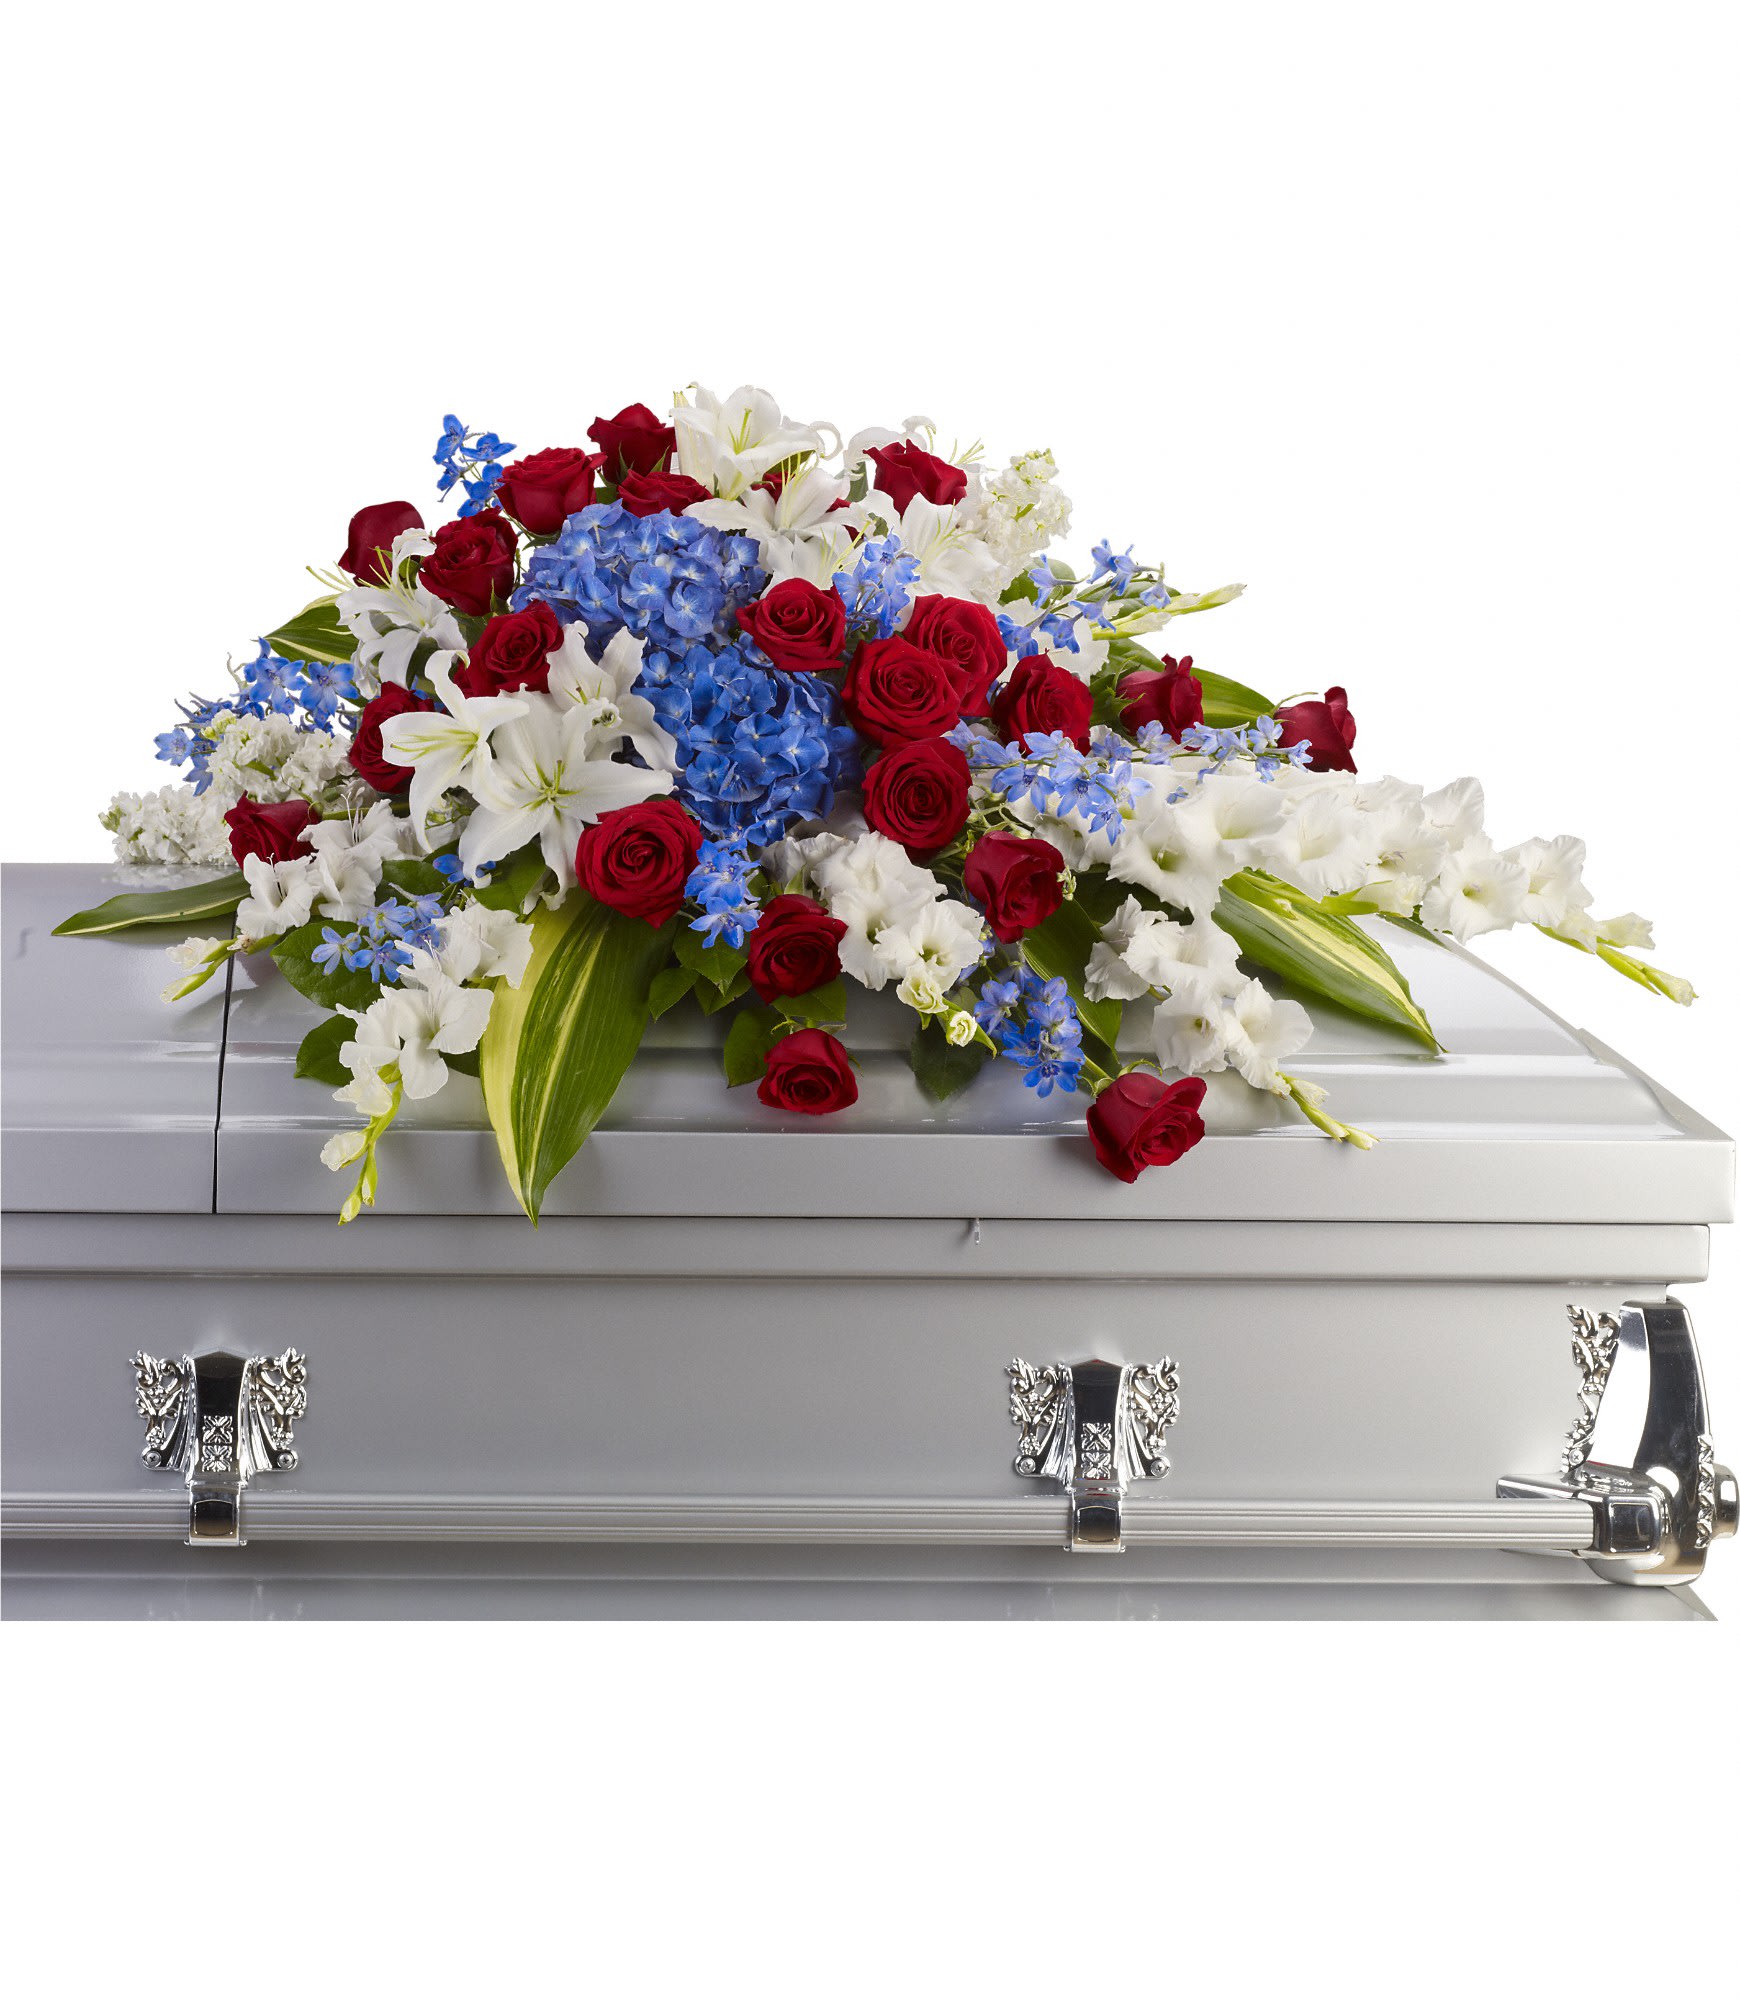 Distinguished Service Casket Spray  - A beautifully patriotic way to pay tribute to a loved one. This half-couch spray sends an eloquent message of strength, respect and freedom. 